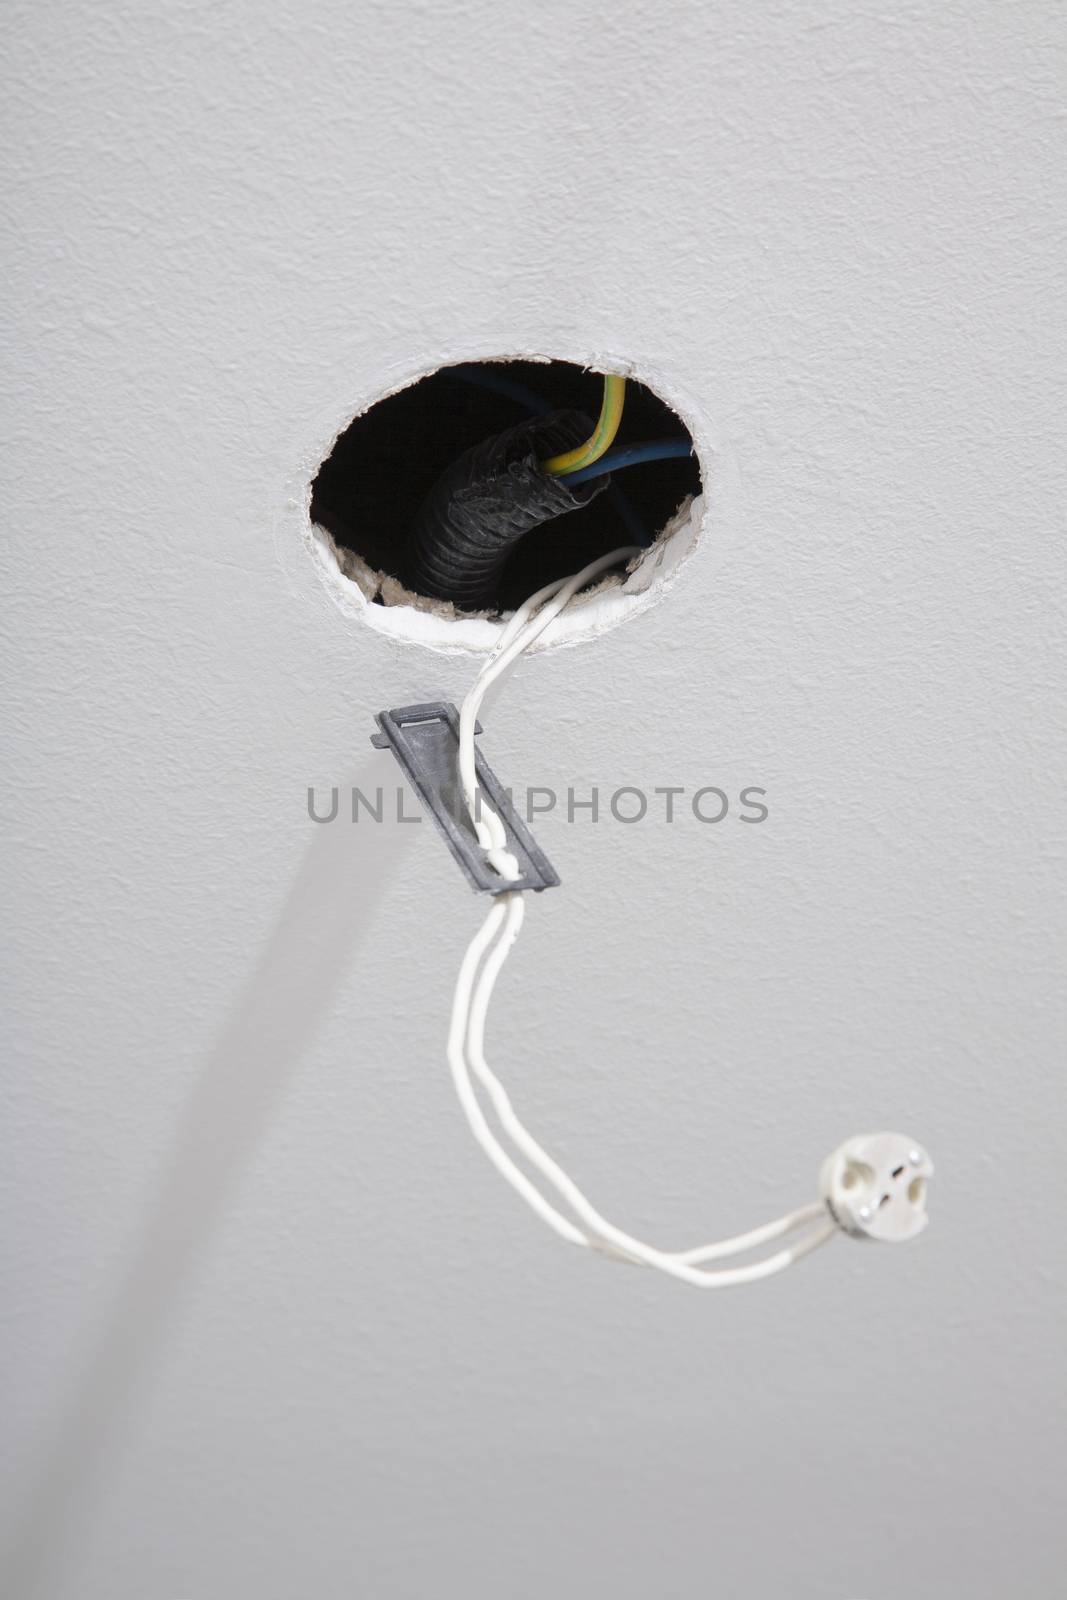 white indoor ceiling with circular hole cable ready for spotlight recessed